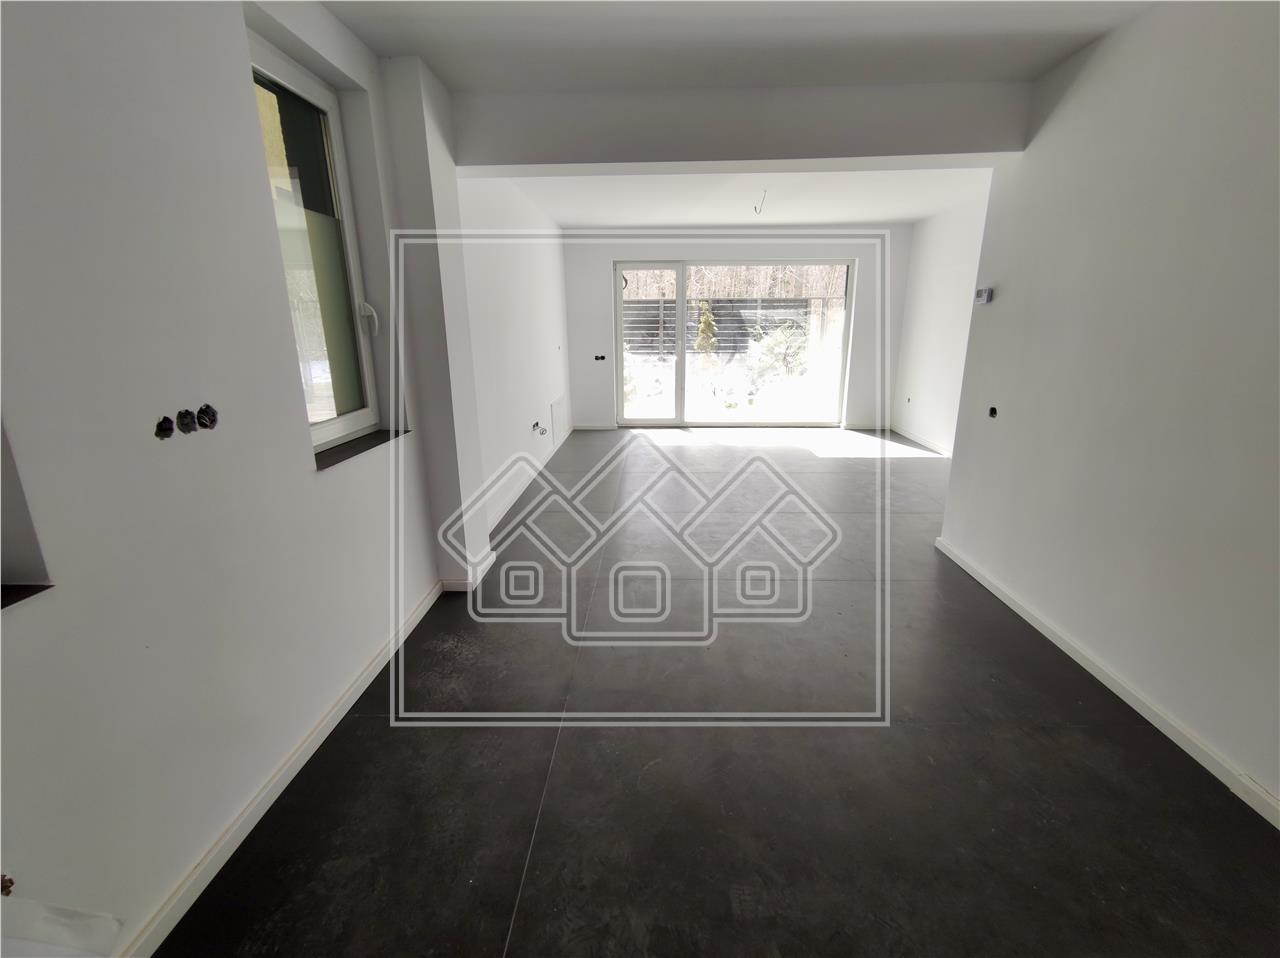 House for rent + office - or 2 apartments - Sibiu, Dumbrava Forest are